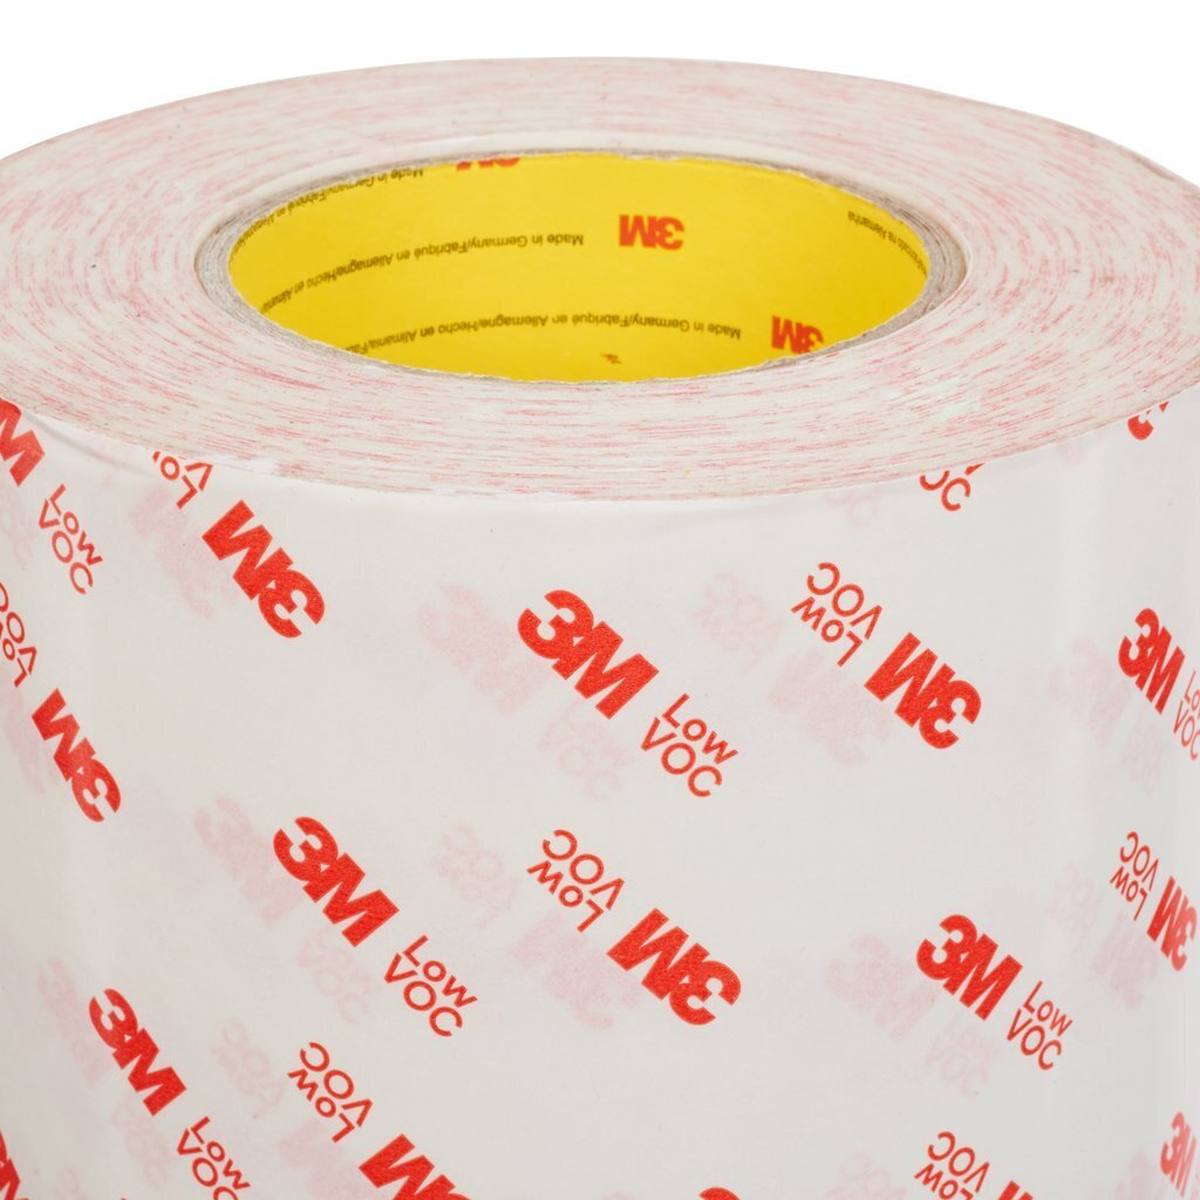 3M Double-sided adhesive tape with non-woven paper backing 99015LVC, white, 12 mm x 50 m, 0.15 mm